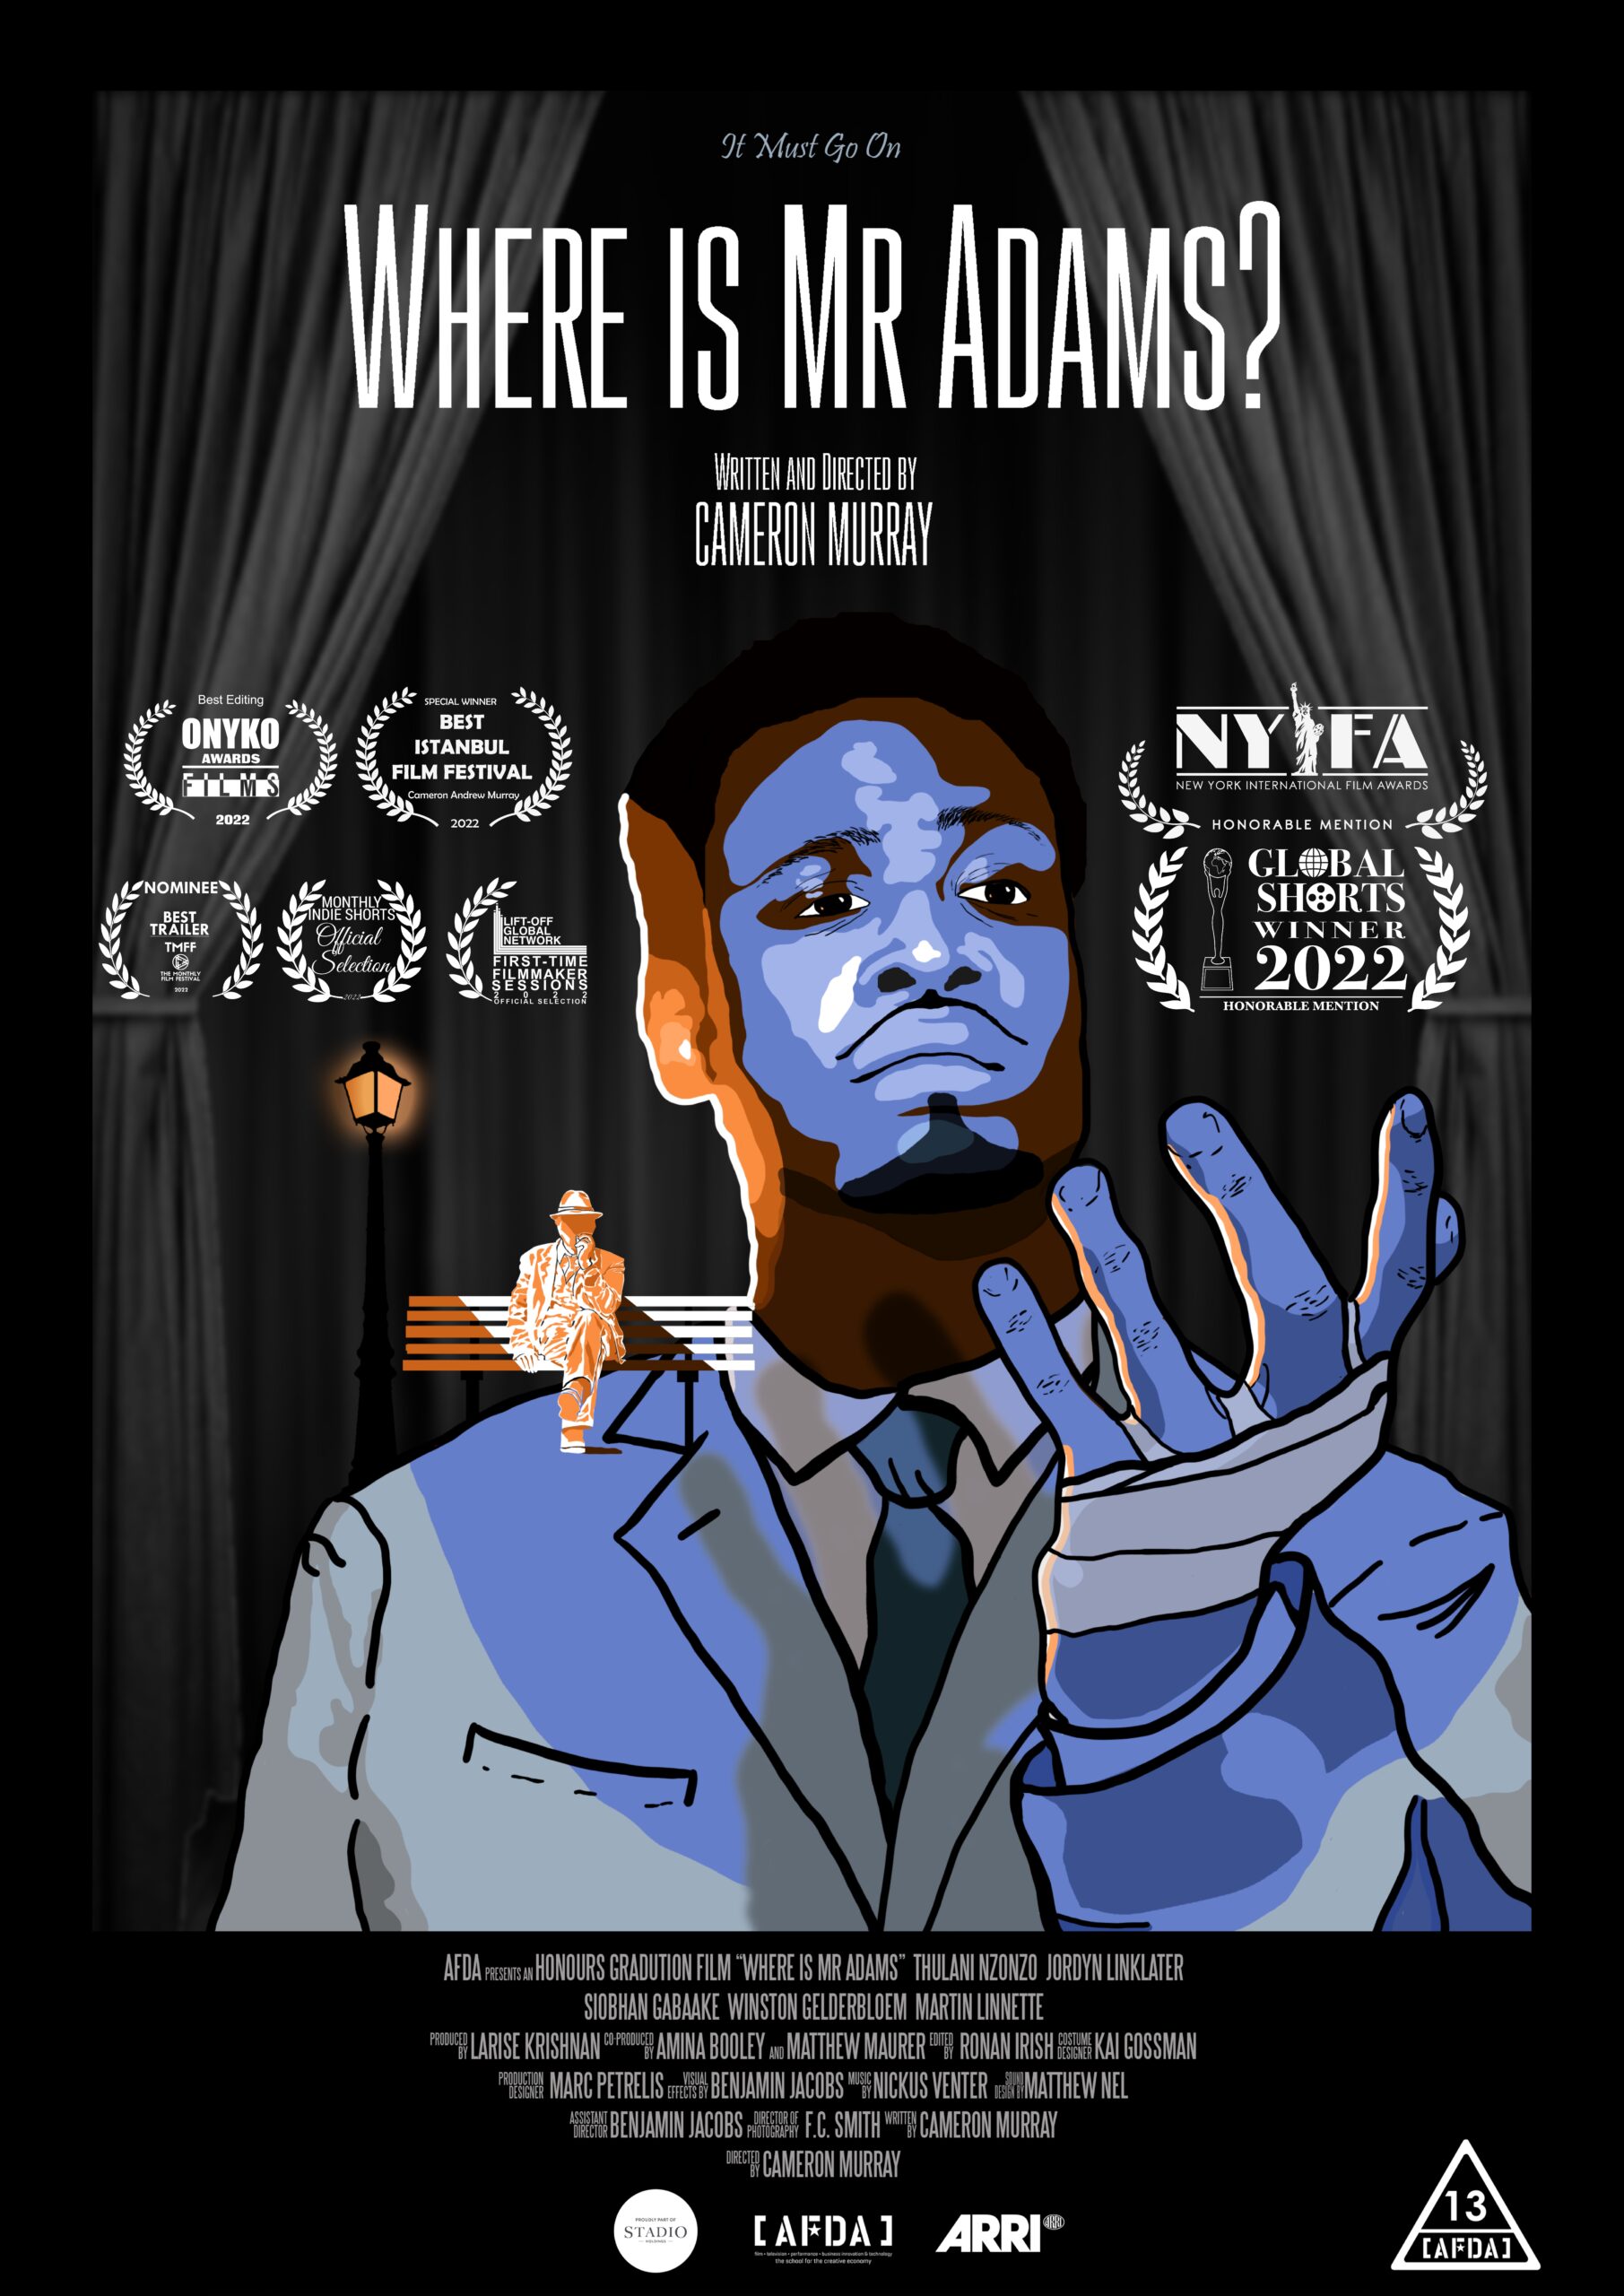 AFDA 2021 graduation film “Where is Mr Adams?” gets global recognition